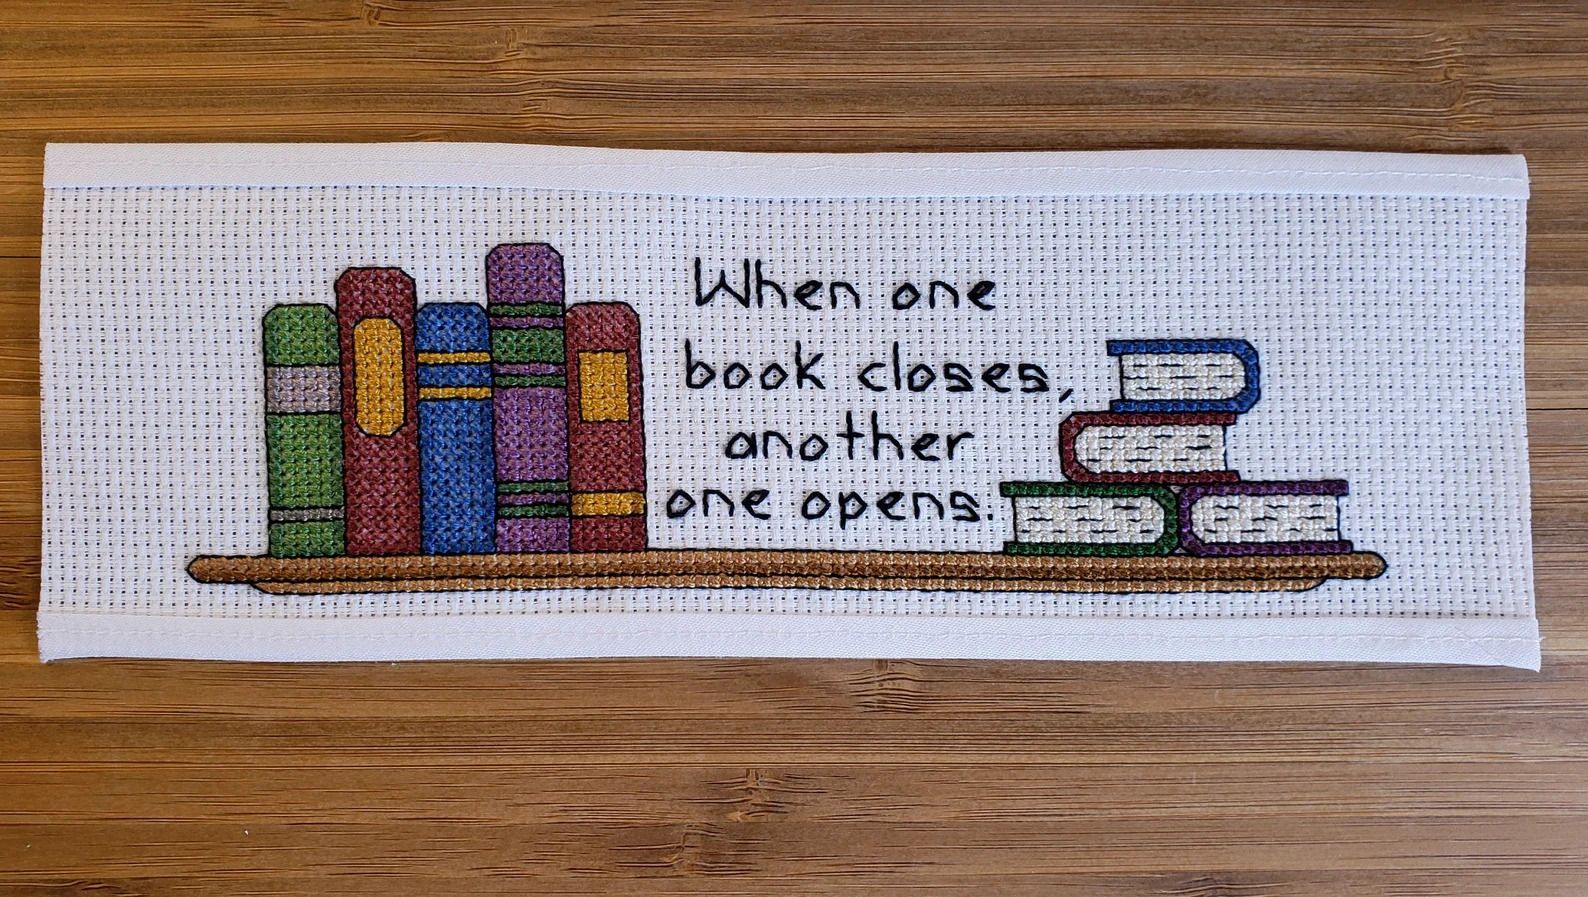 a photo of a Book Cross Stitch Bookmark Kit that says, "When on book closes, another one opens."